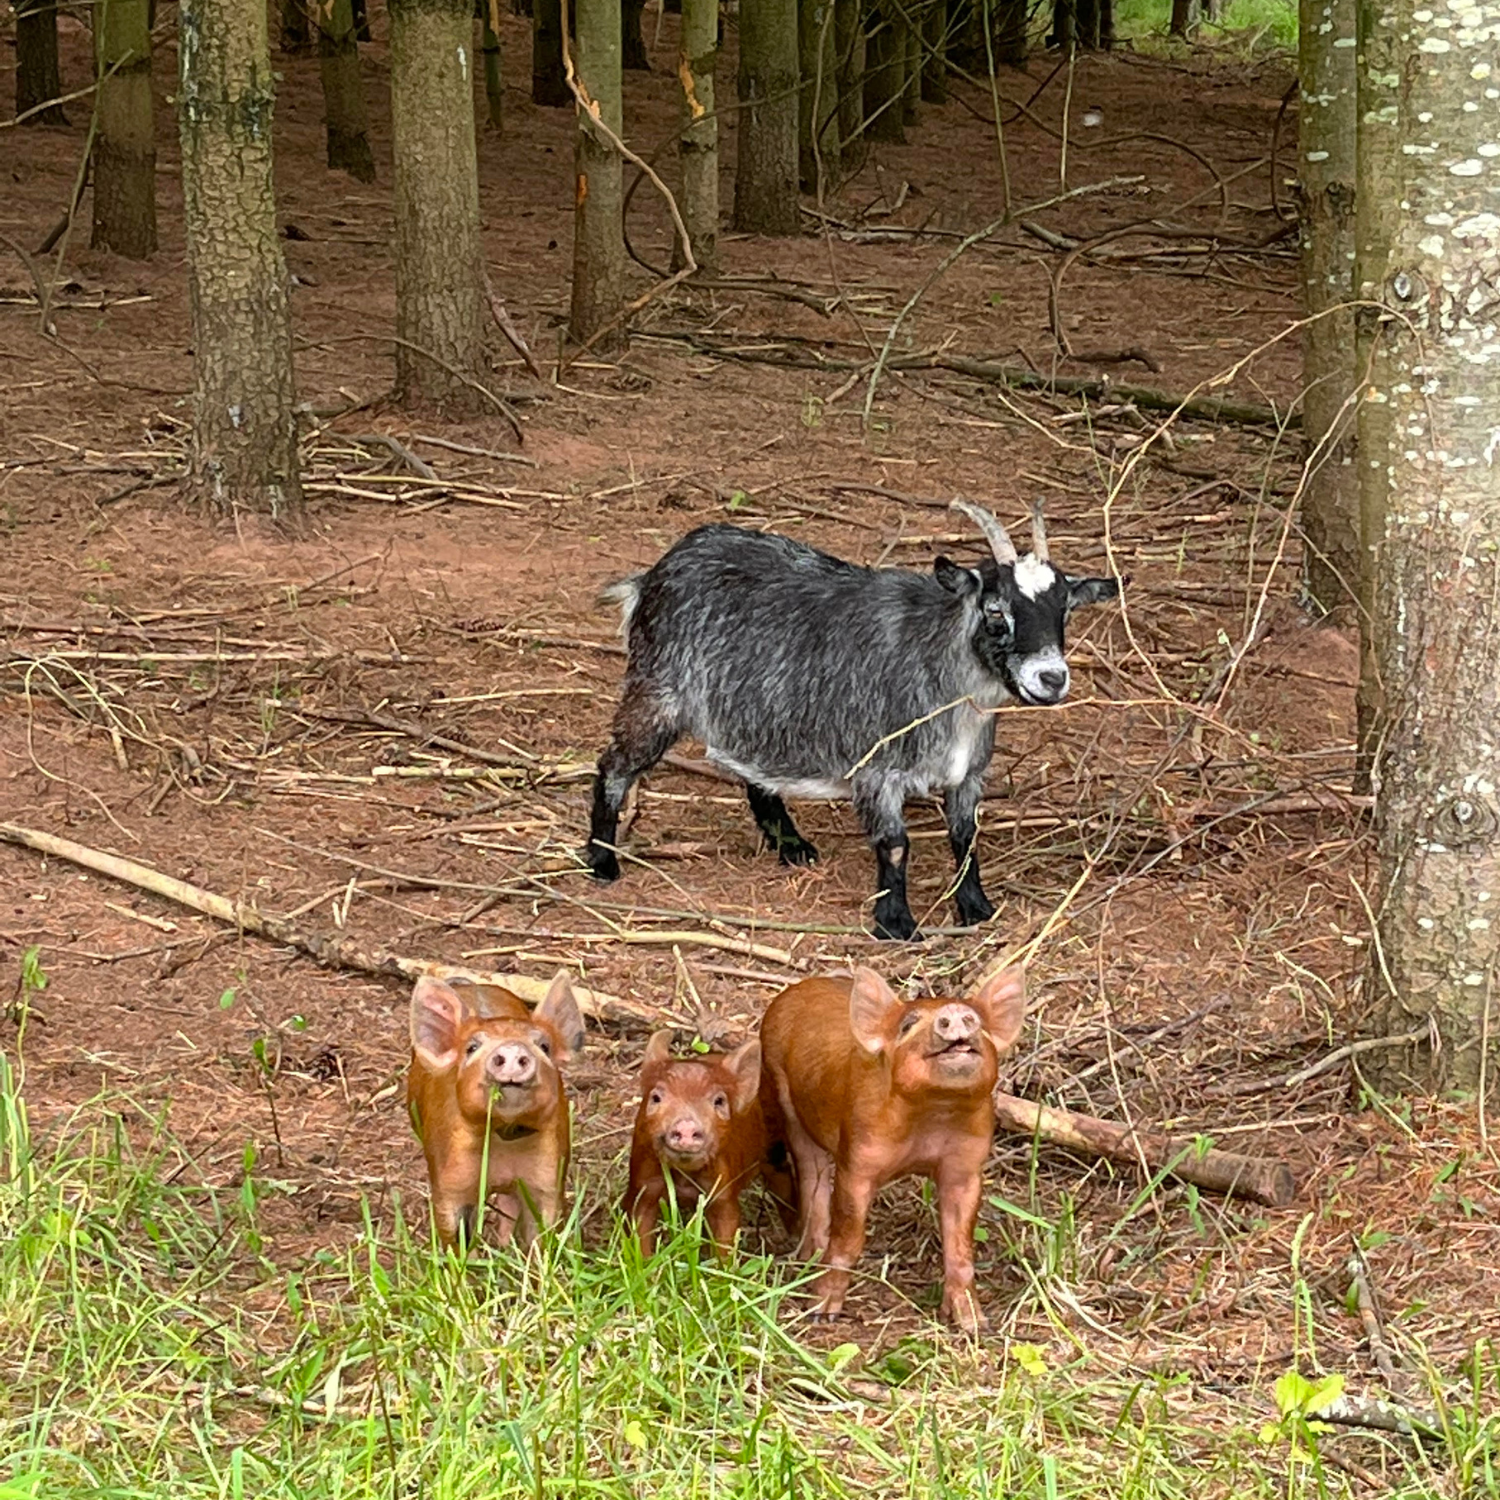 Goats and piglets are here!